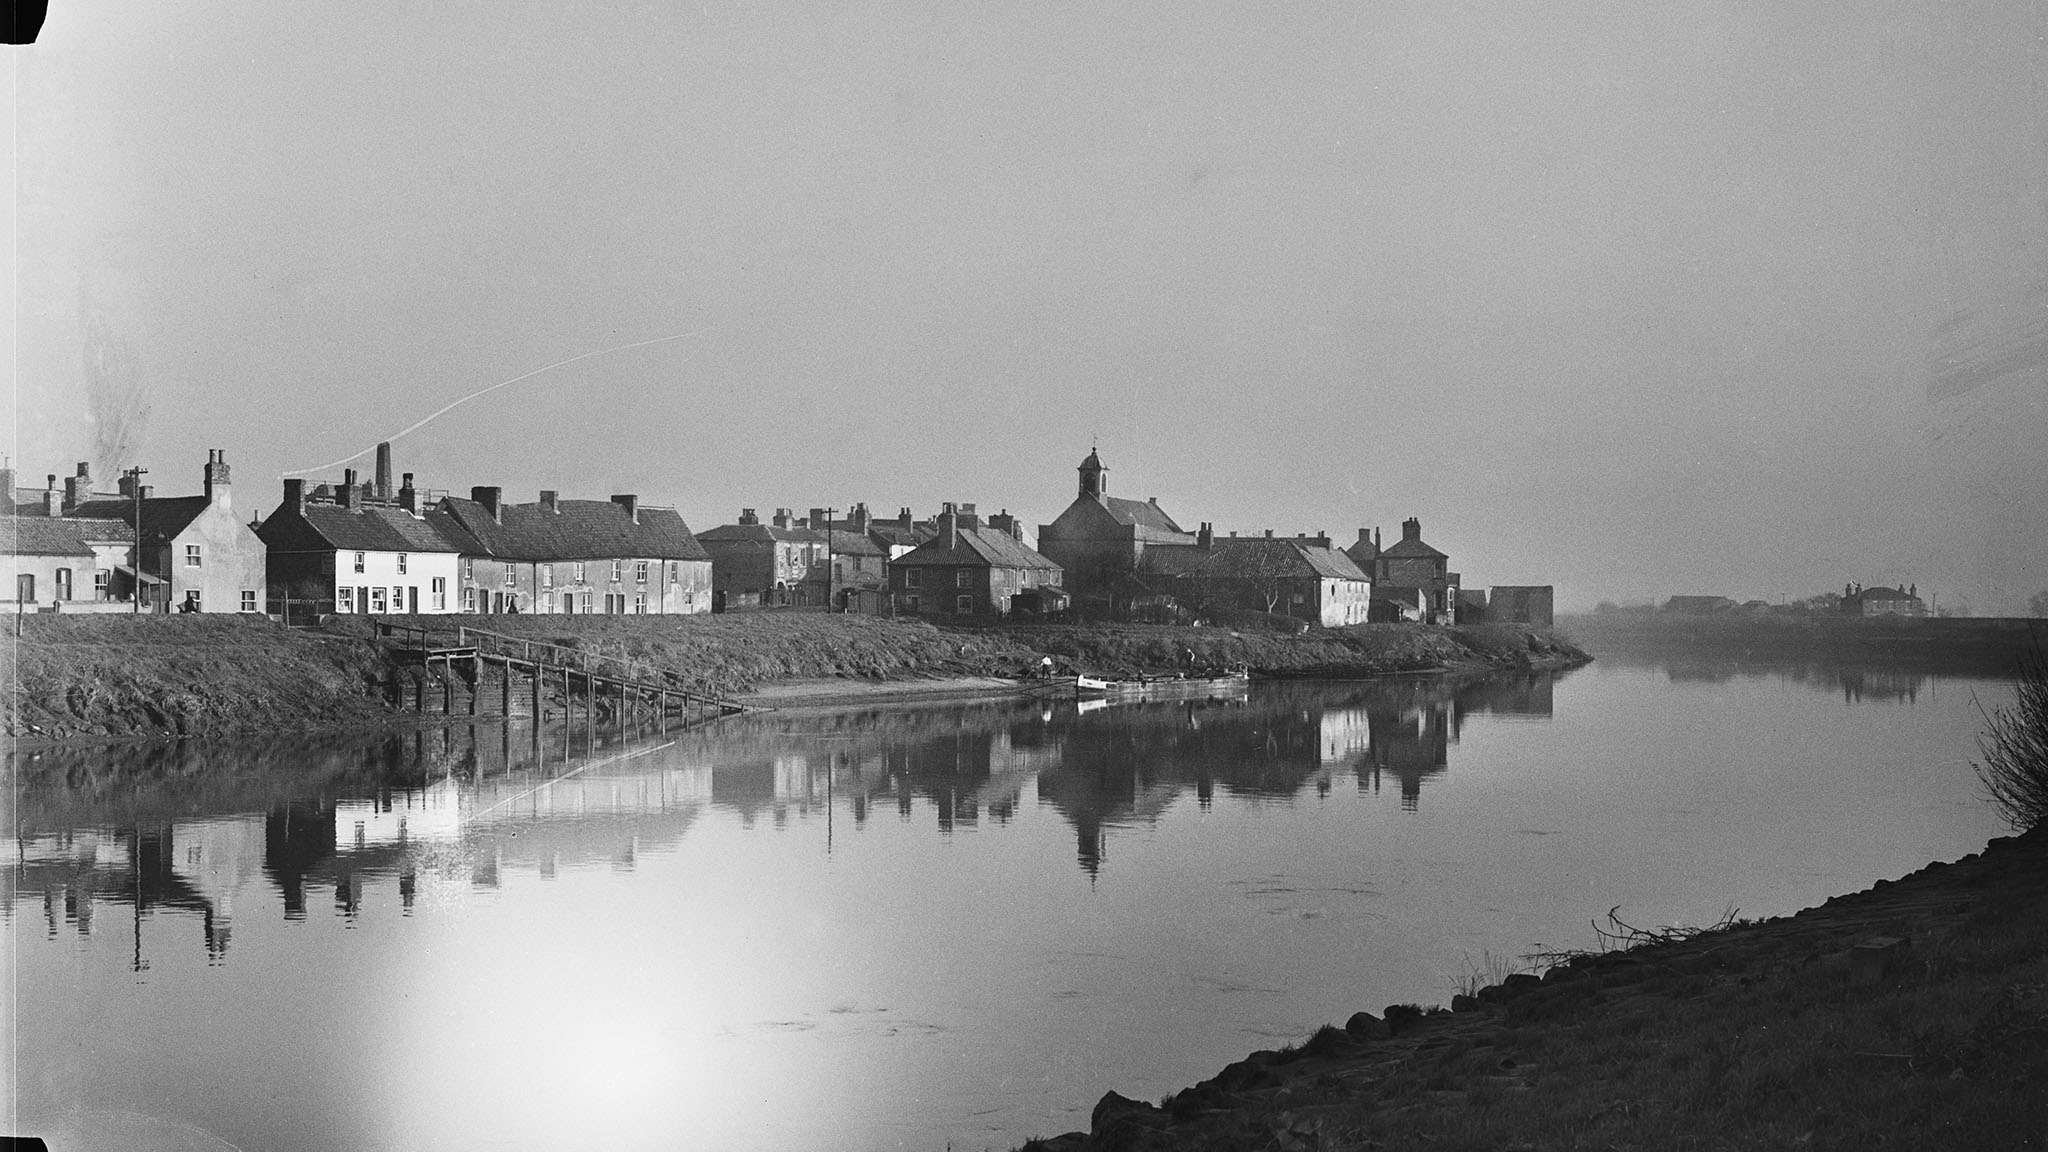 Black and white archive photograph of a townscape viewed across a river.